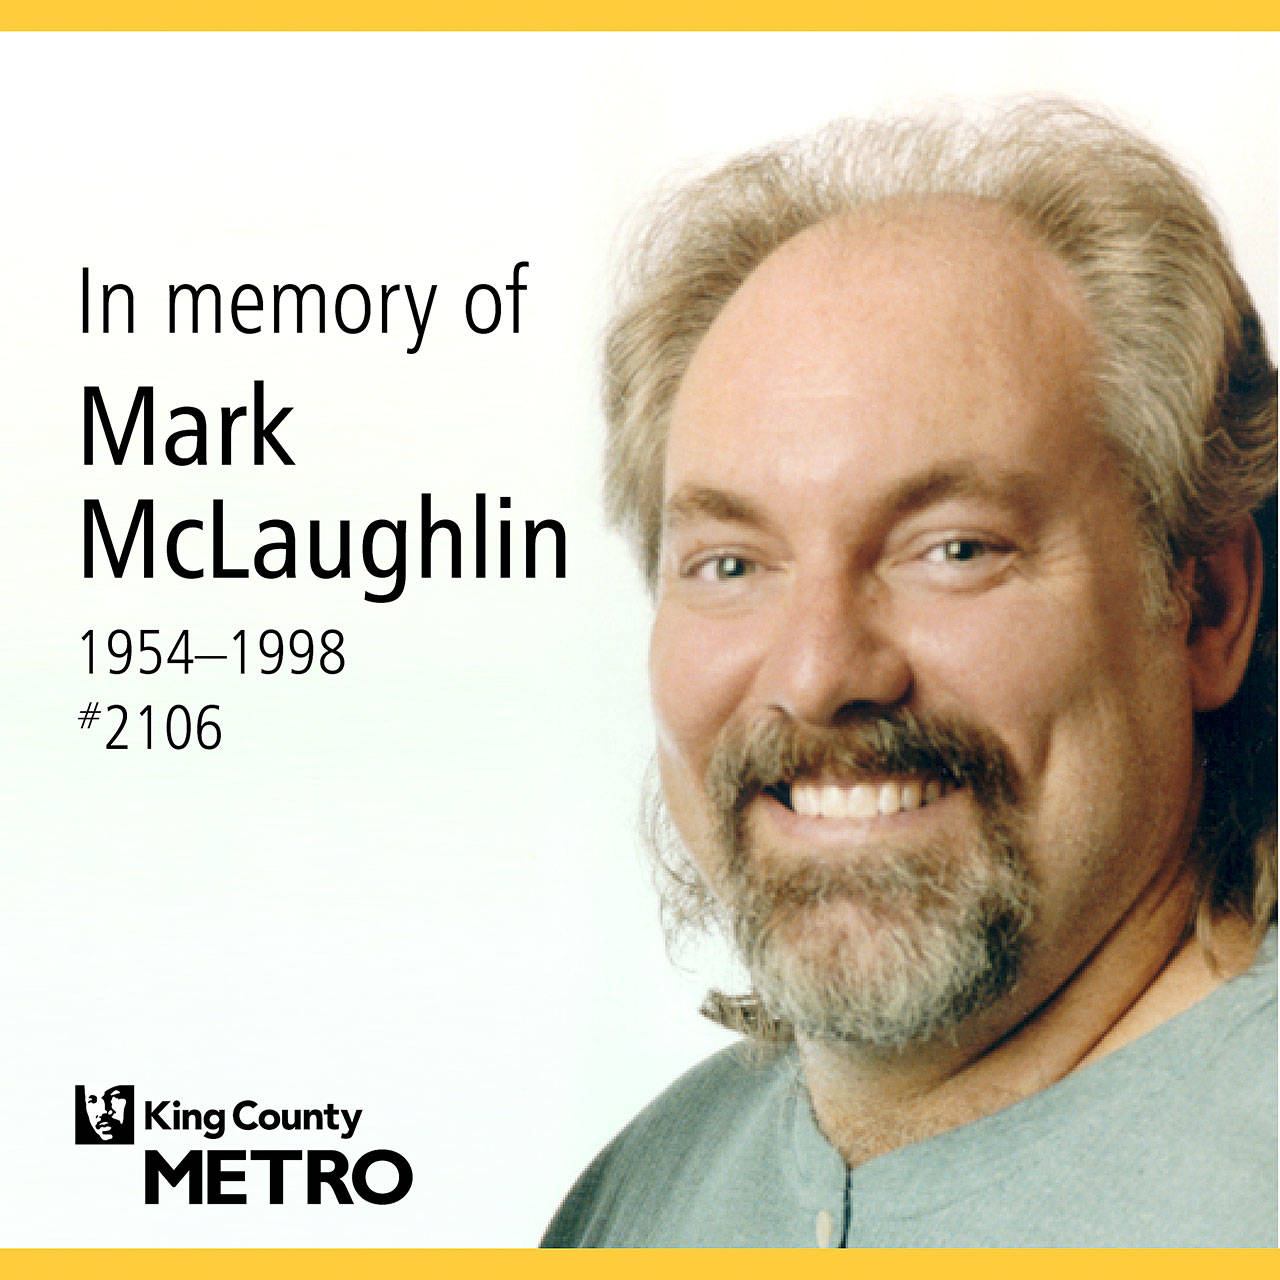 King County Metro paused bus services at 3:20 p.m. on Friday, Nov. 23, to honor the memory of Mark McLaughlin. McLaughlin was killed in the line of duty on Nov. 27, 1998. Courtesy of King County Metro.